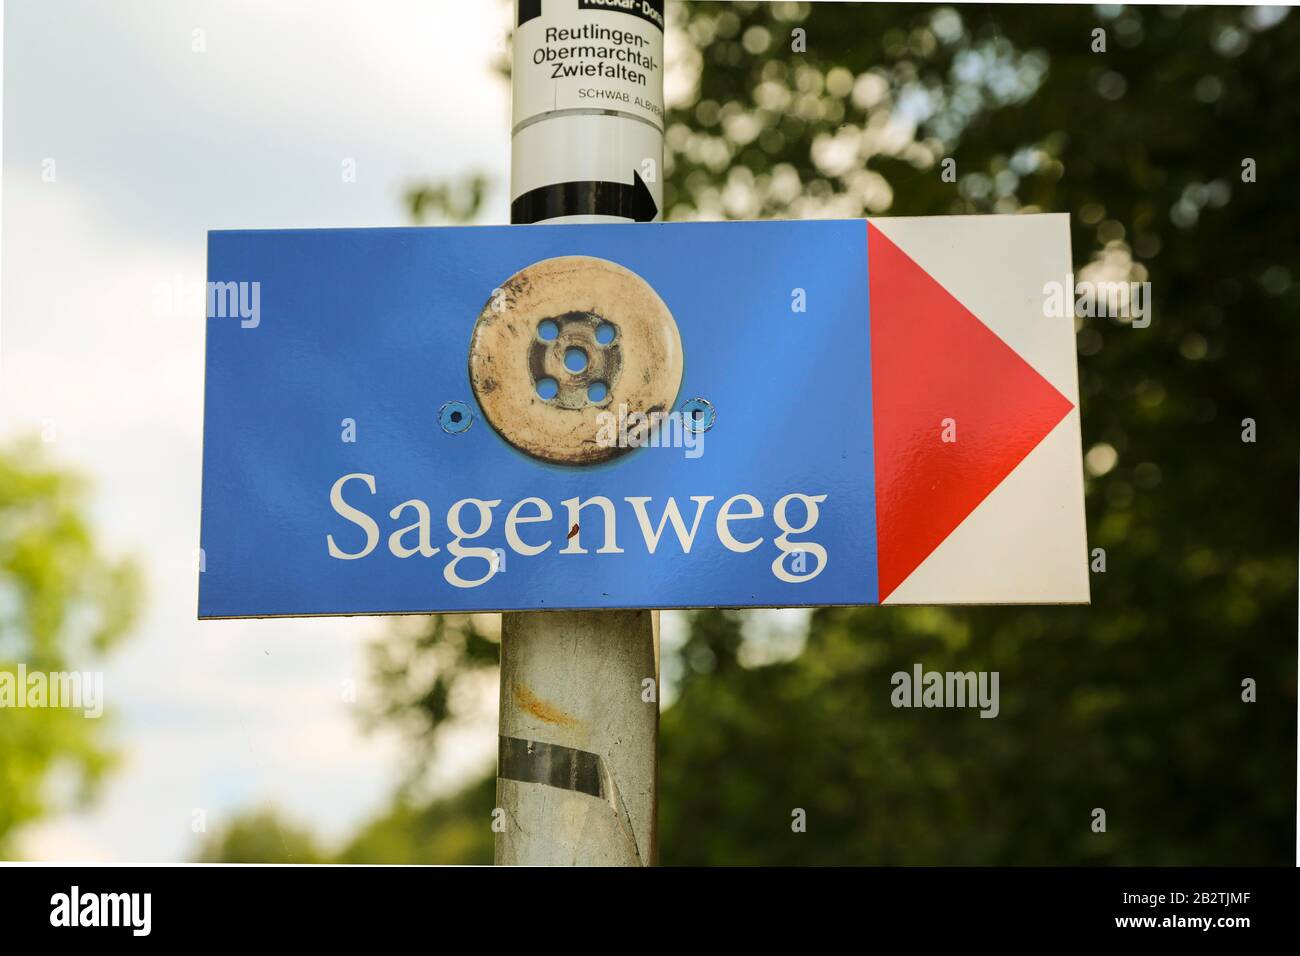 Pfullinger Sagenweg, signpost with symbol Remmseles, trouser button, shield, world of legends, wooden art, wooden figures carved with a chainsaw Stock Photo